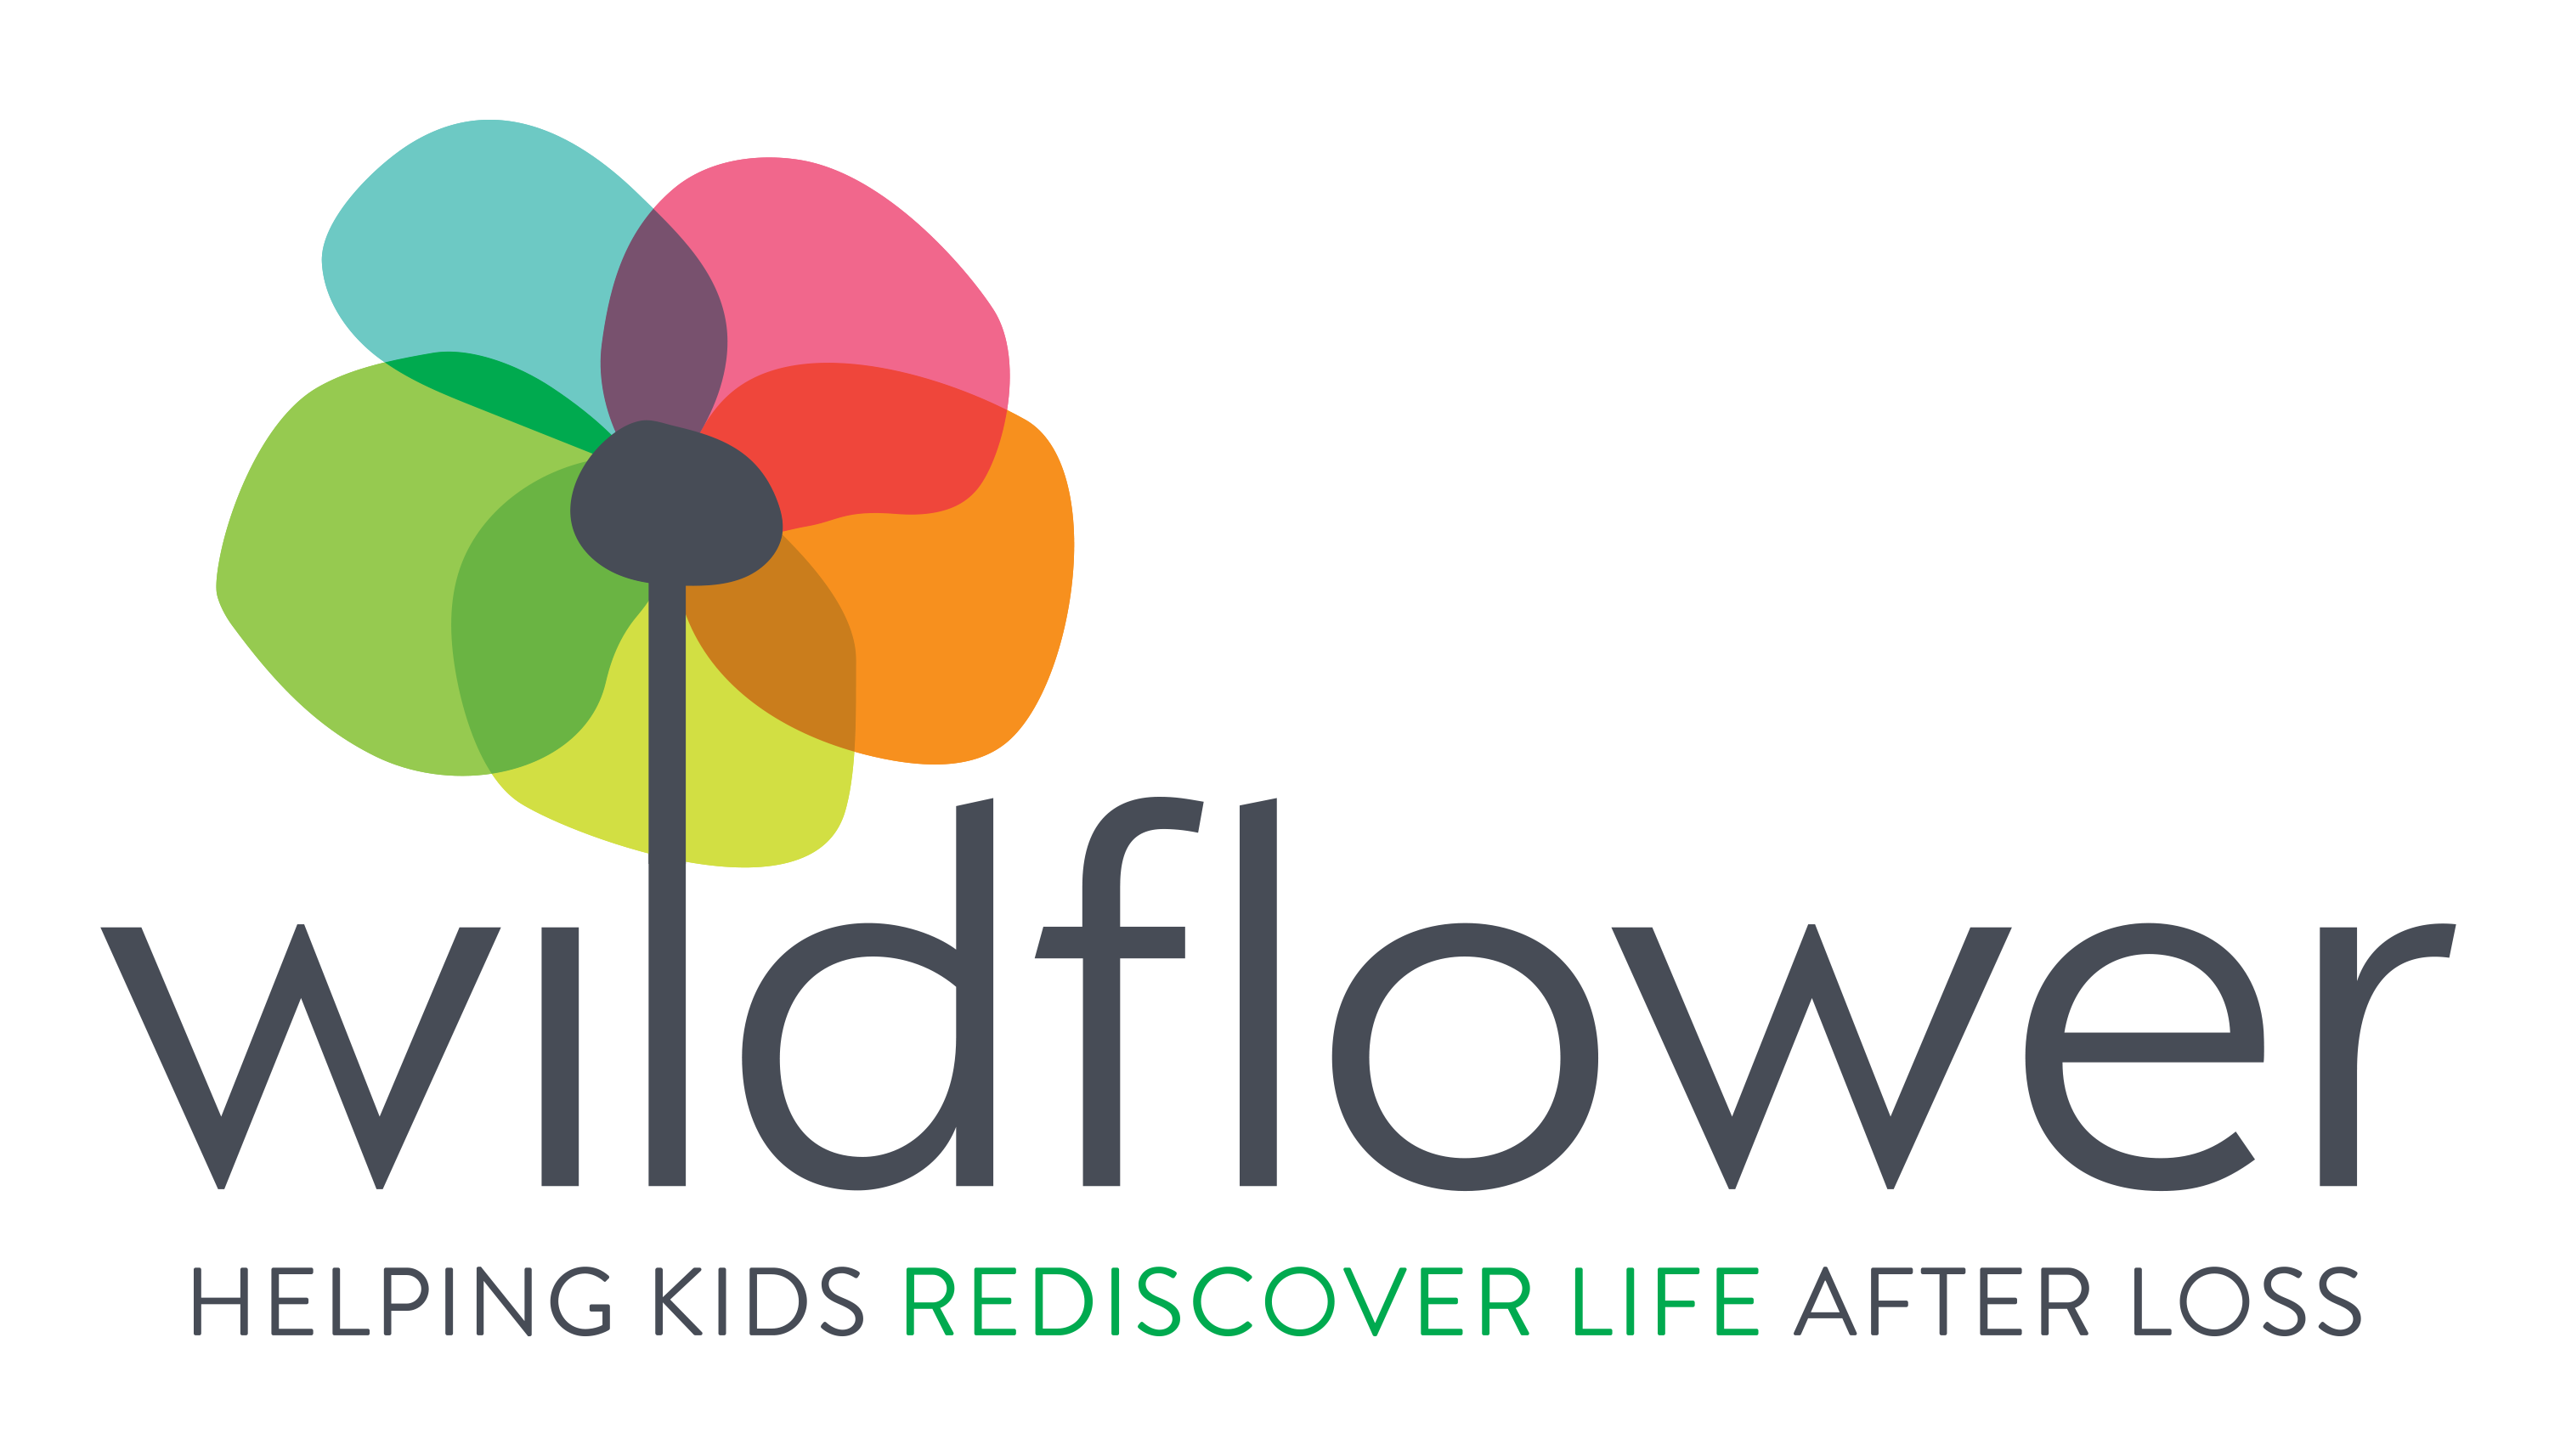 Wildflower: Helping Kids Rediscover Life After Loss